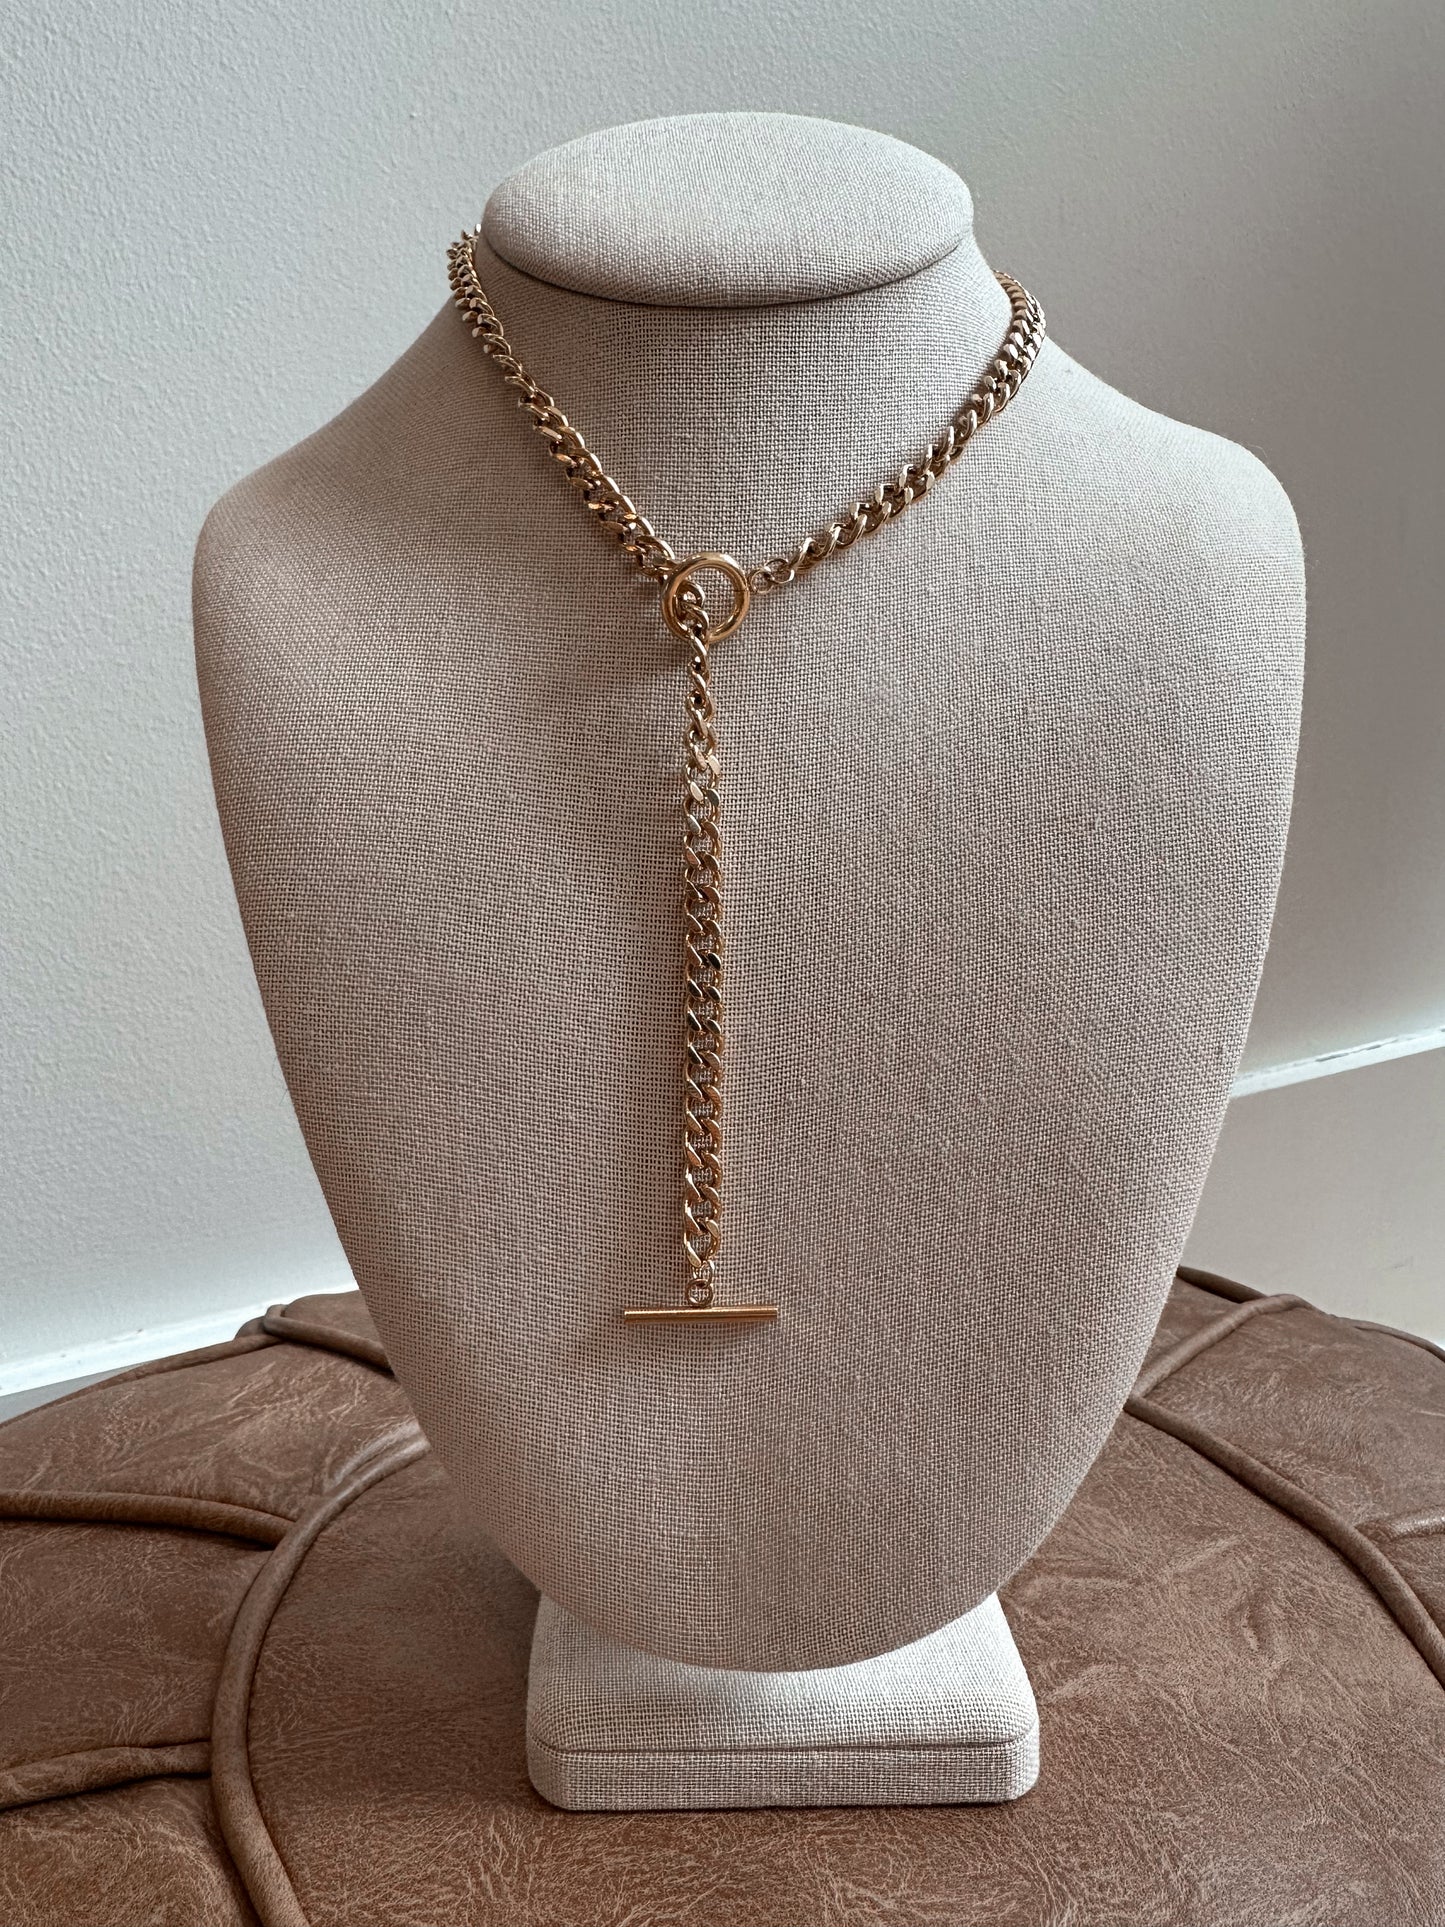 The Chunky Toggle Necklace